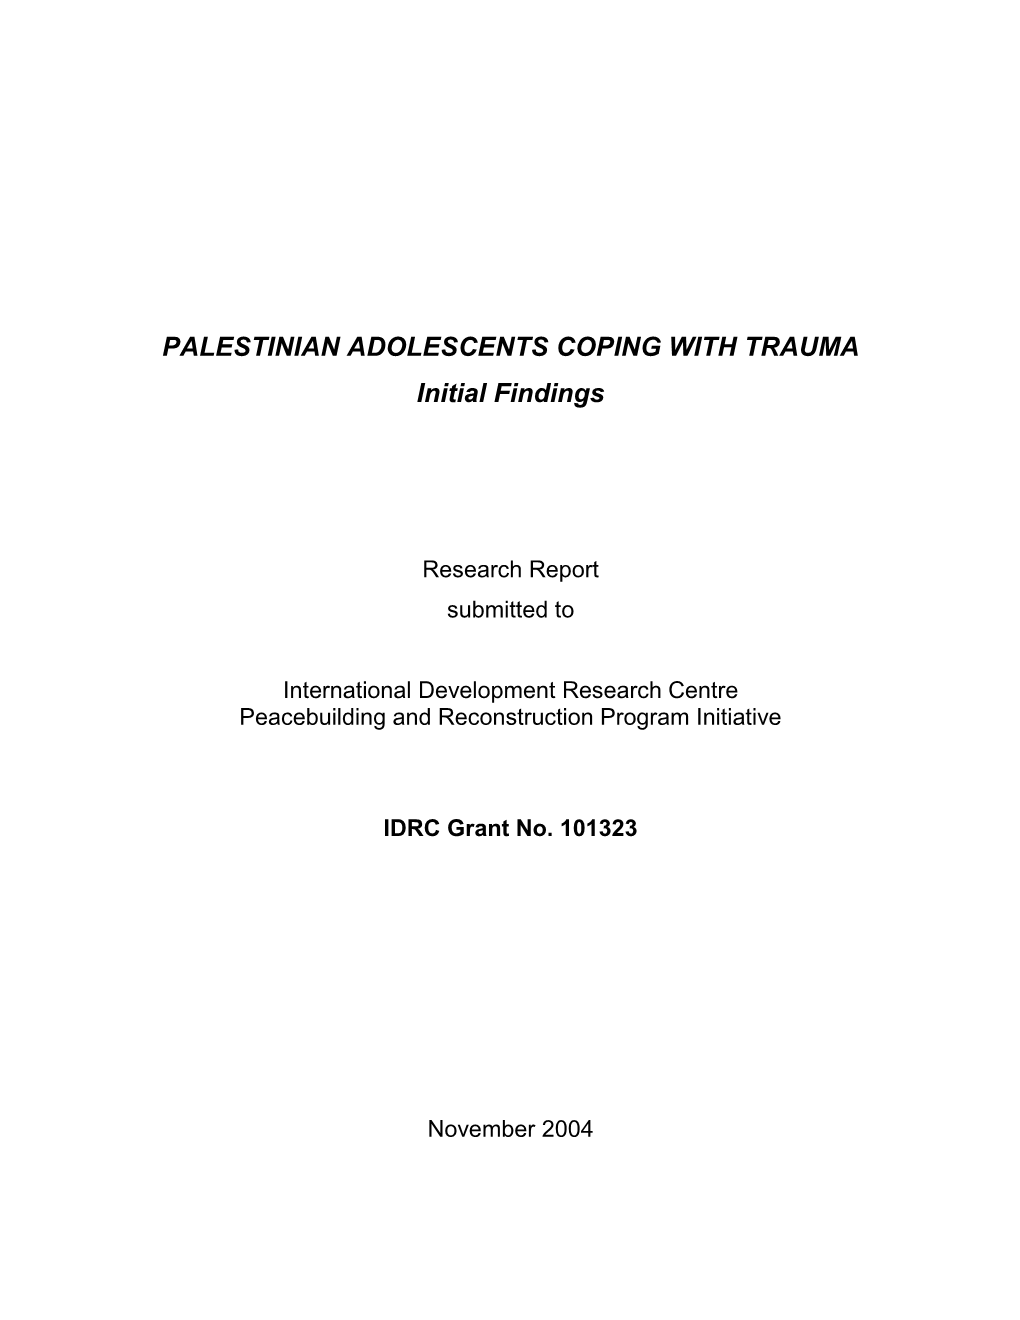 PALESTINIAN ADOLESCENTS COPING with TRAUMA Initial Findings